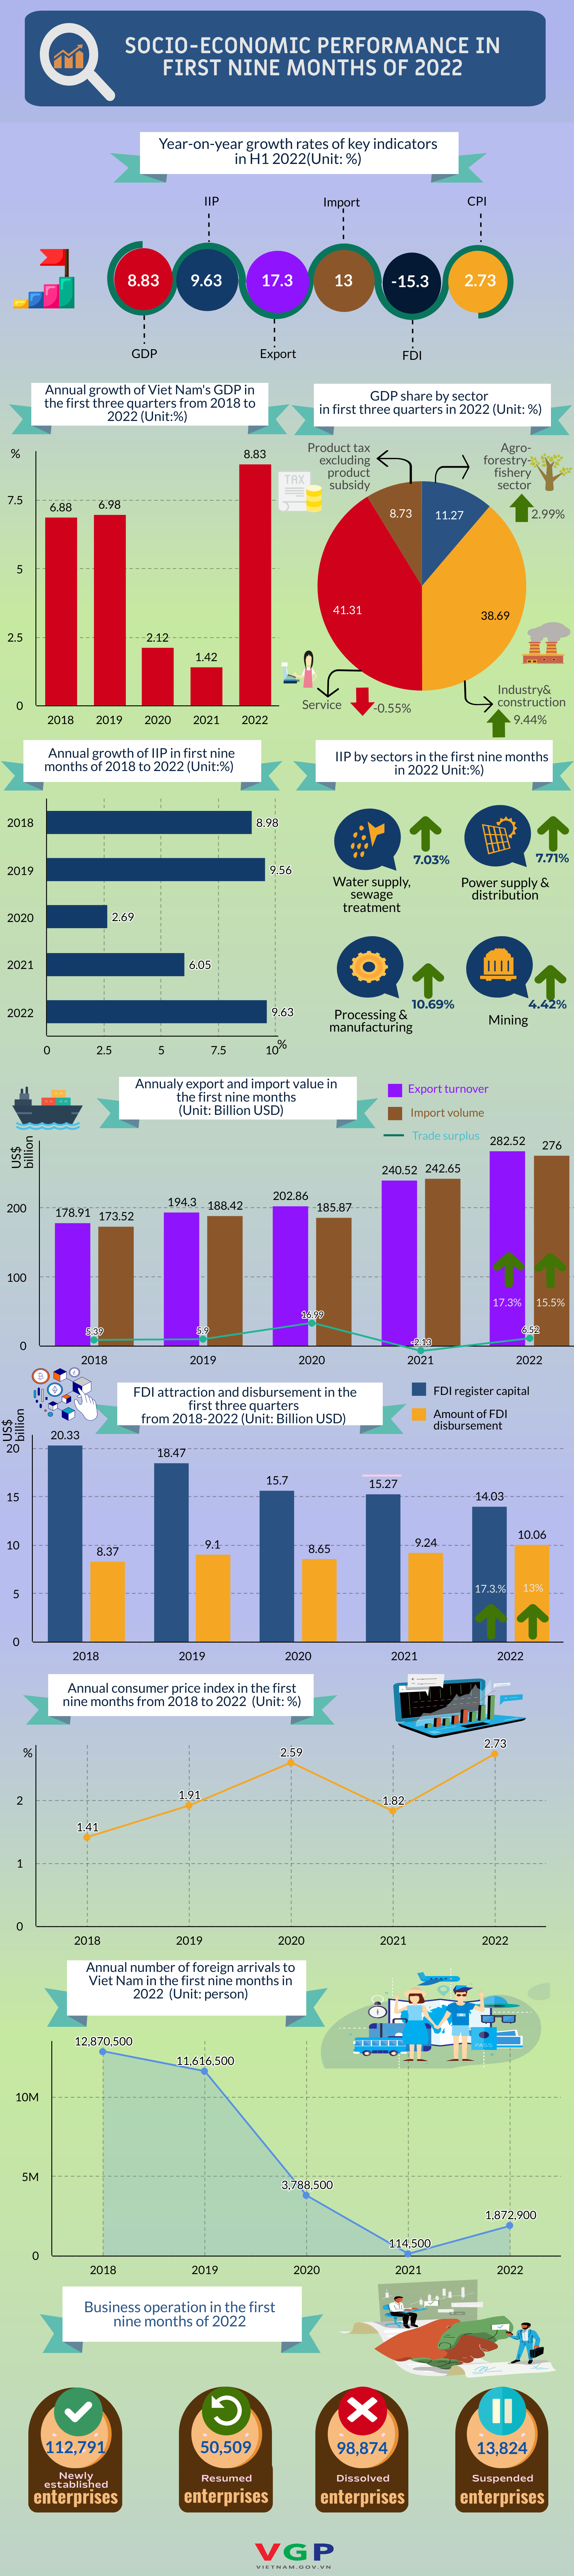 INFOGRAPHIC: SOCIAL-ECONOMIC SITUATION IN THE FIRST THREE QUARTER OF 2022  - Ảnh 1.